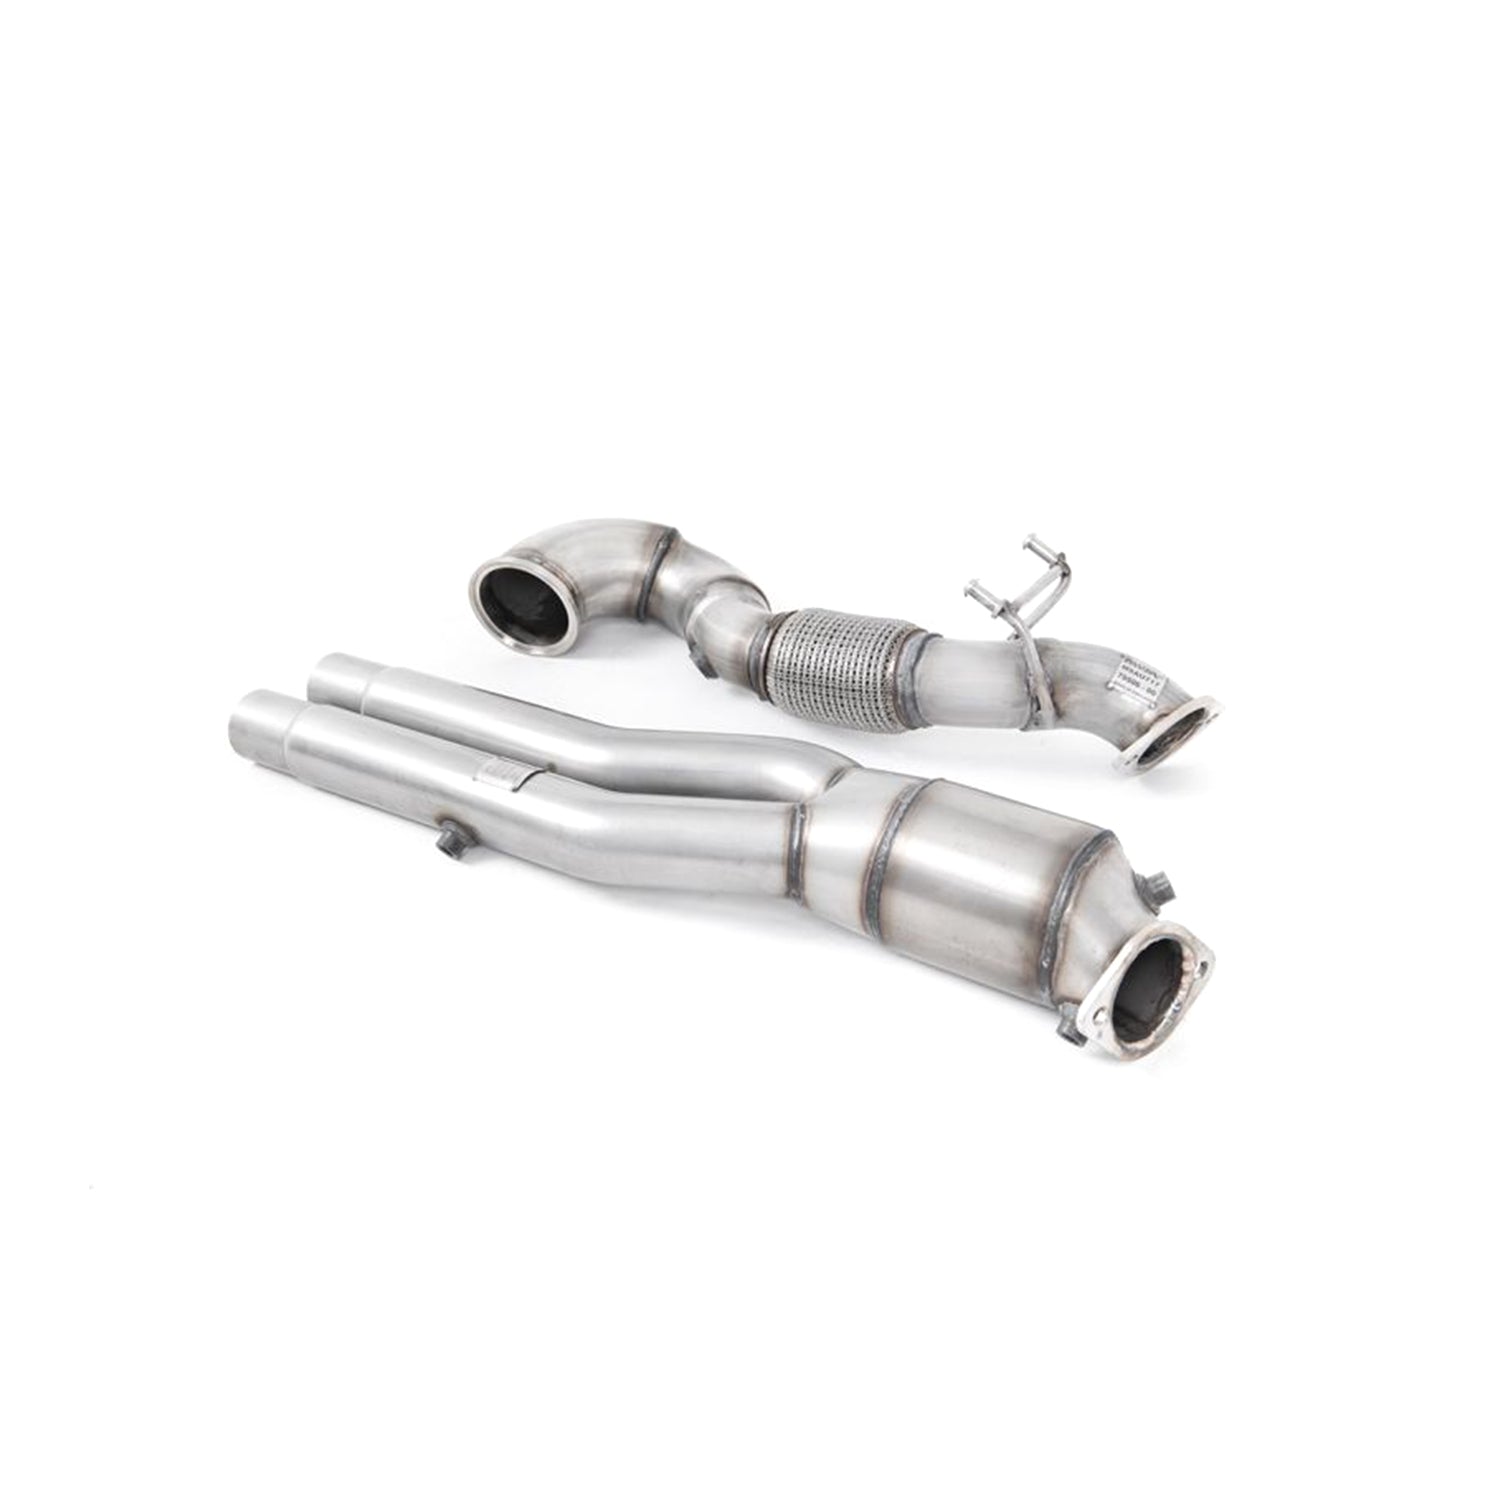 Milltek Sport Audi RS3 Saloon Large Bore Downpipe & Hi Flow Sports Cat Exhaust With GPF Bypass (8Y)-R44 Performance